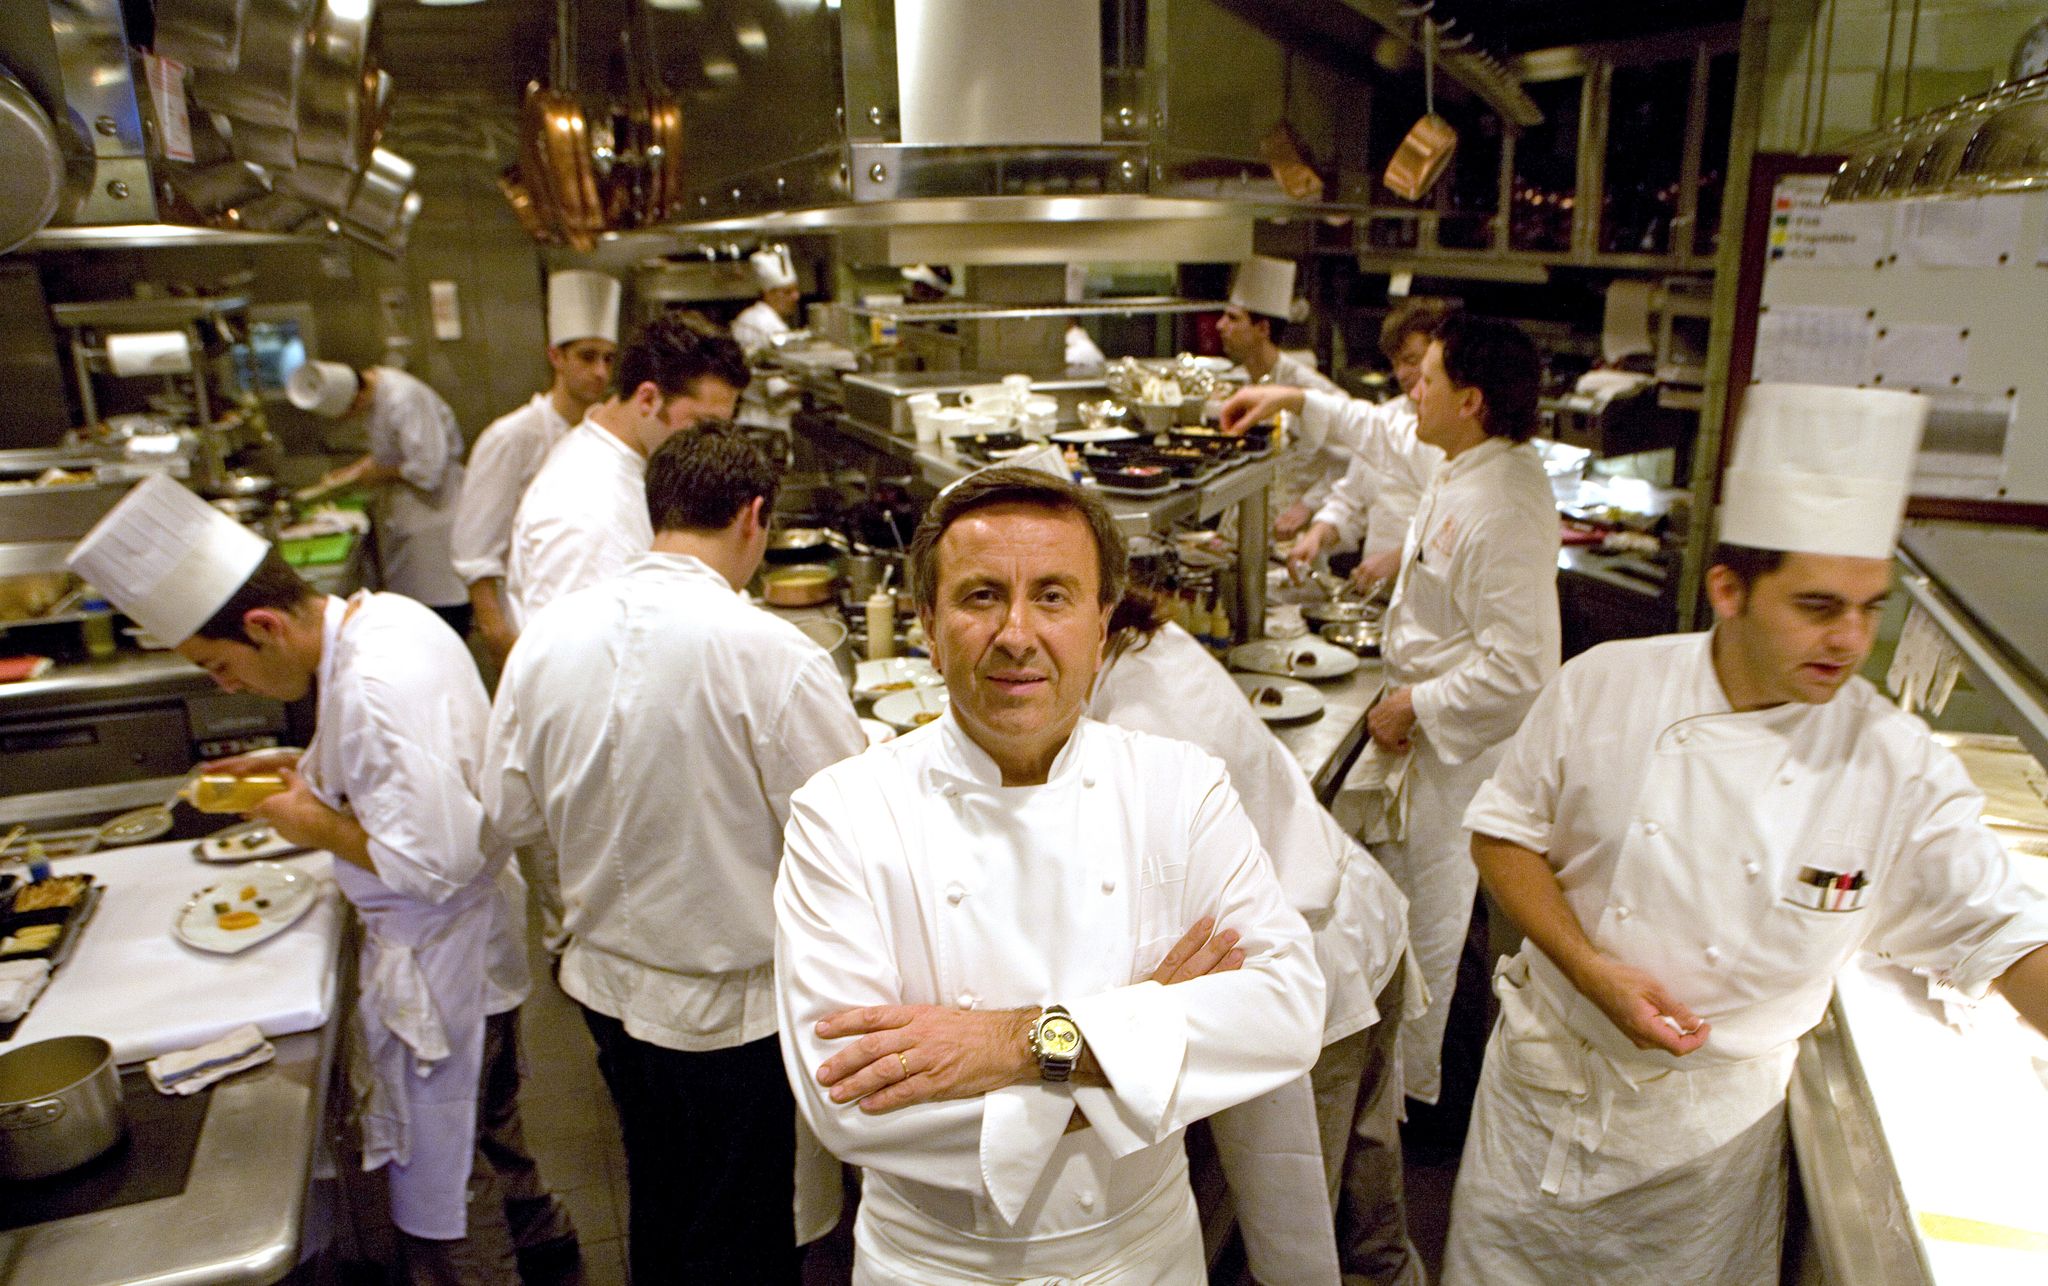 restaurant "daniel" owned by french chef daniel boulud, most admired in town manhattan city of new york united states tres repute restaurant "daniel" cree par le chef francais daniel boulud, manhattan ville de new york etats unis